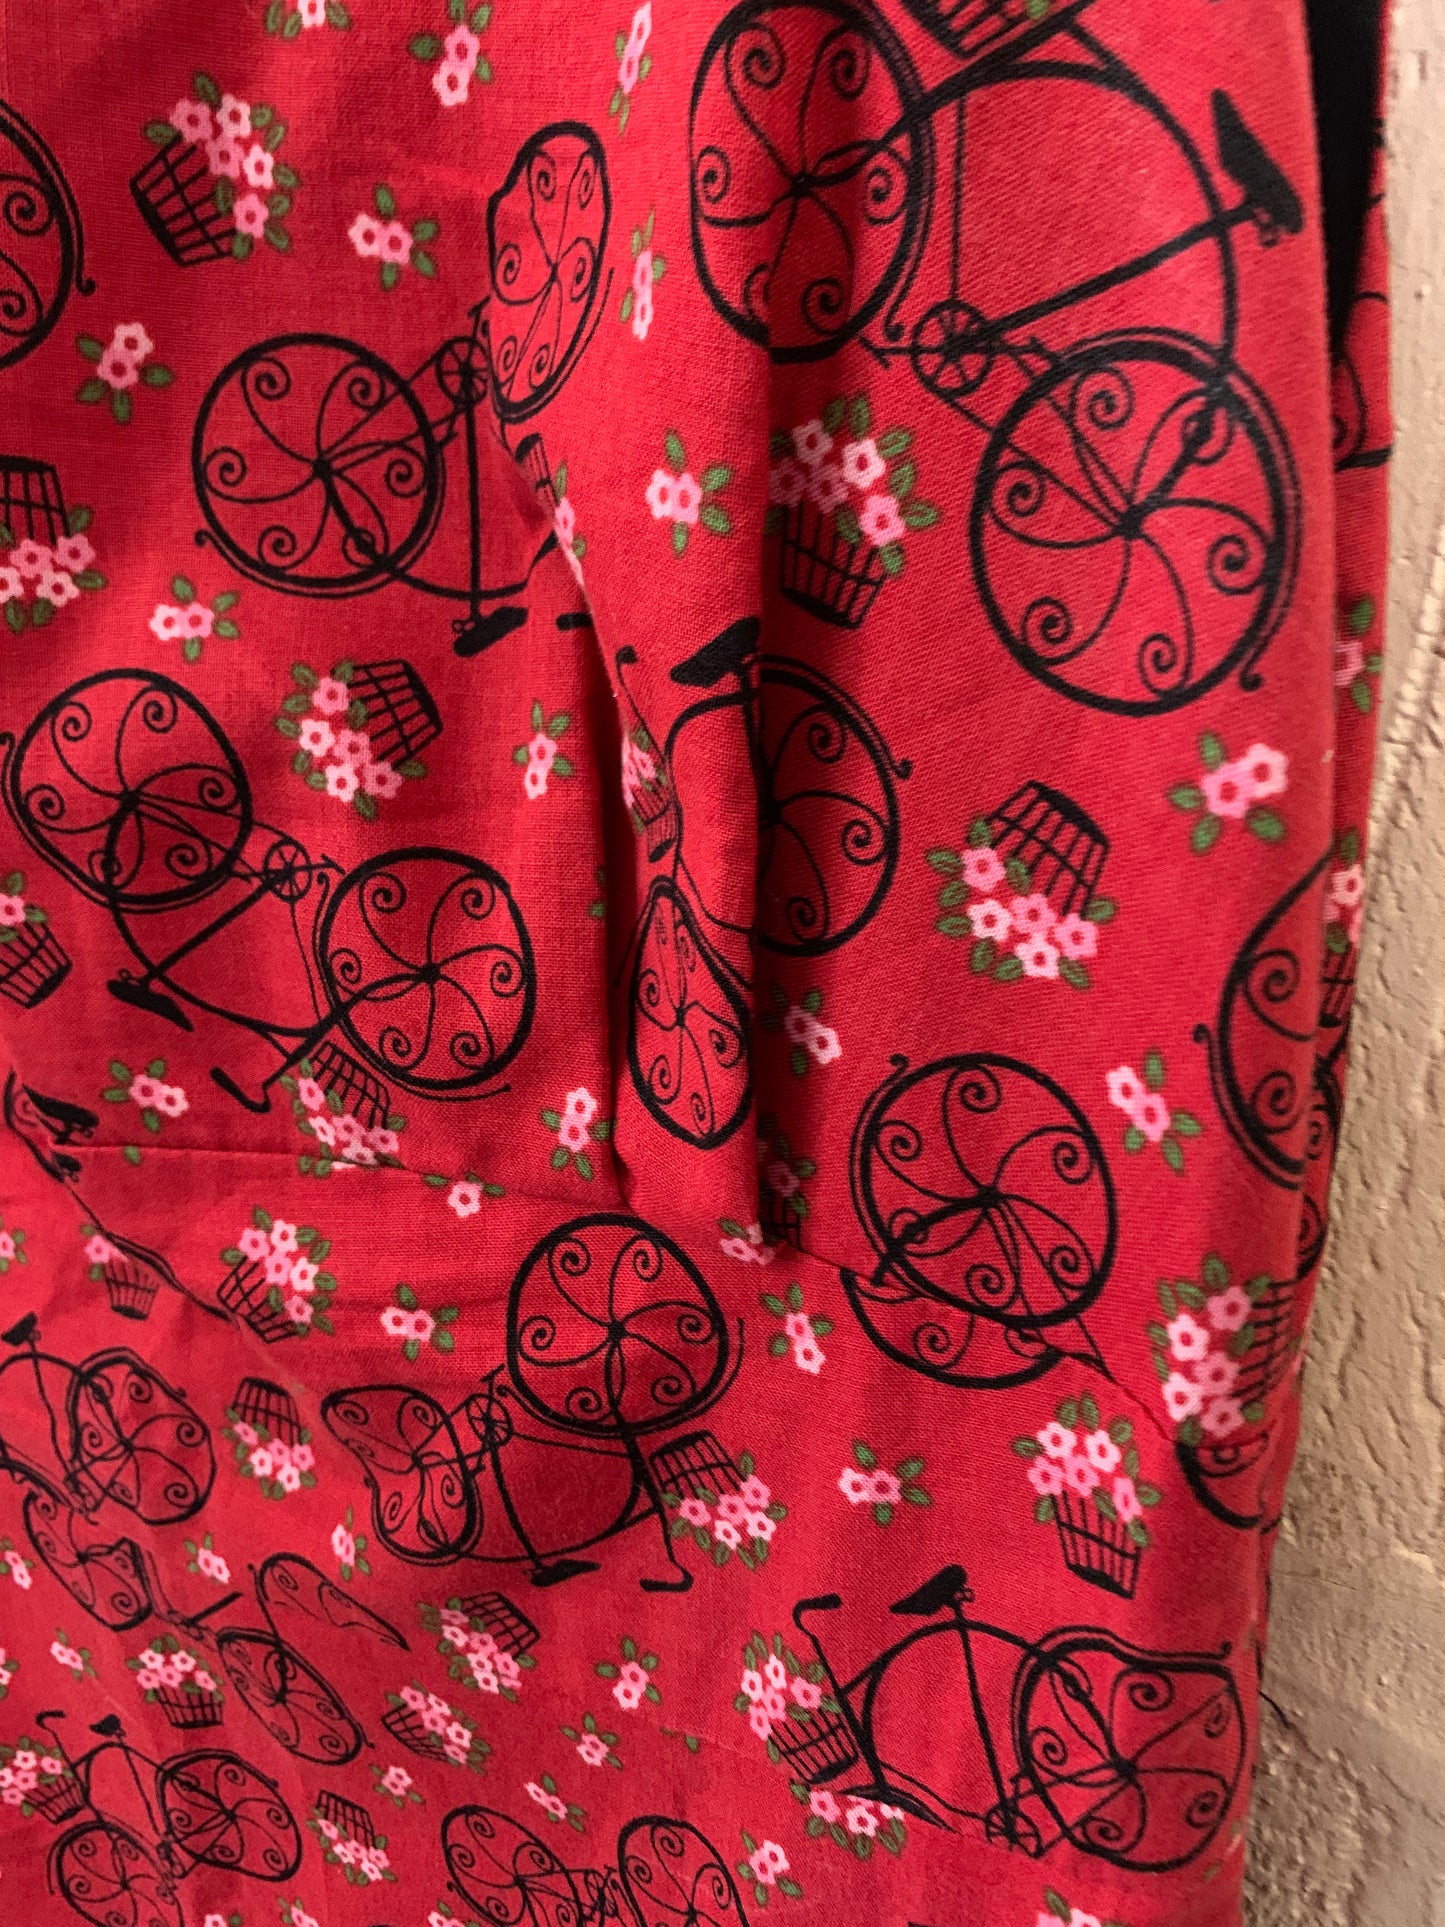 1950s Style Get Cutie Sleeveless Red Printed with Bicycle Dress  Size 12